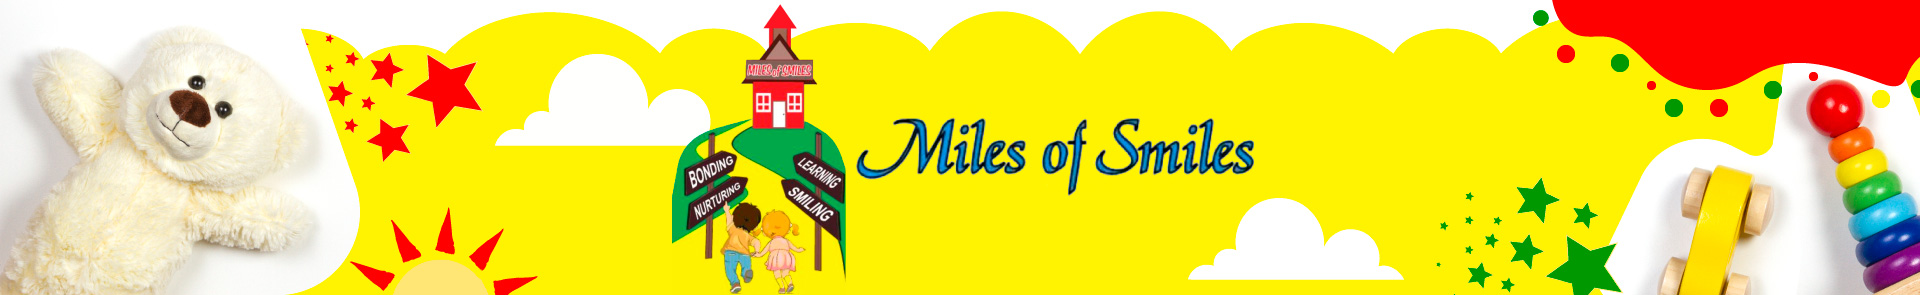 Miles of Smiles Family Daycare - Header